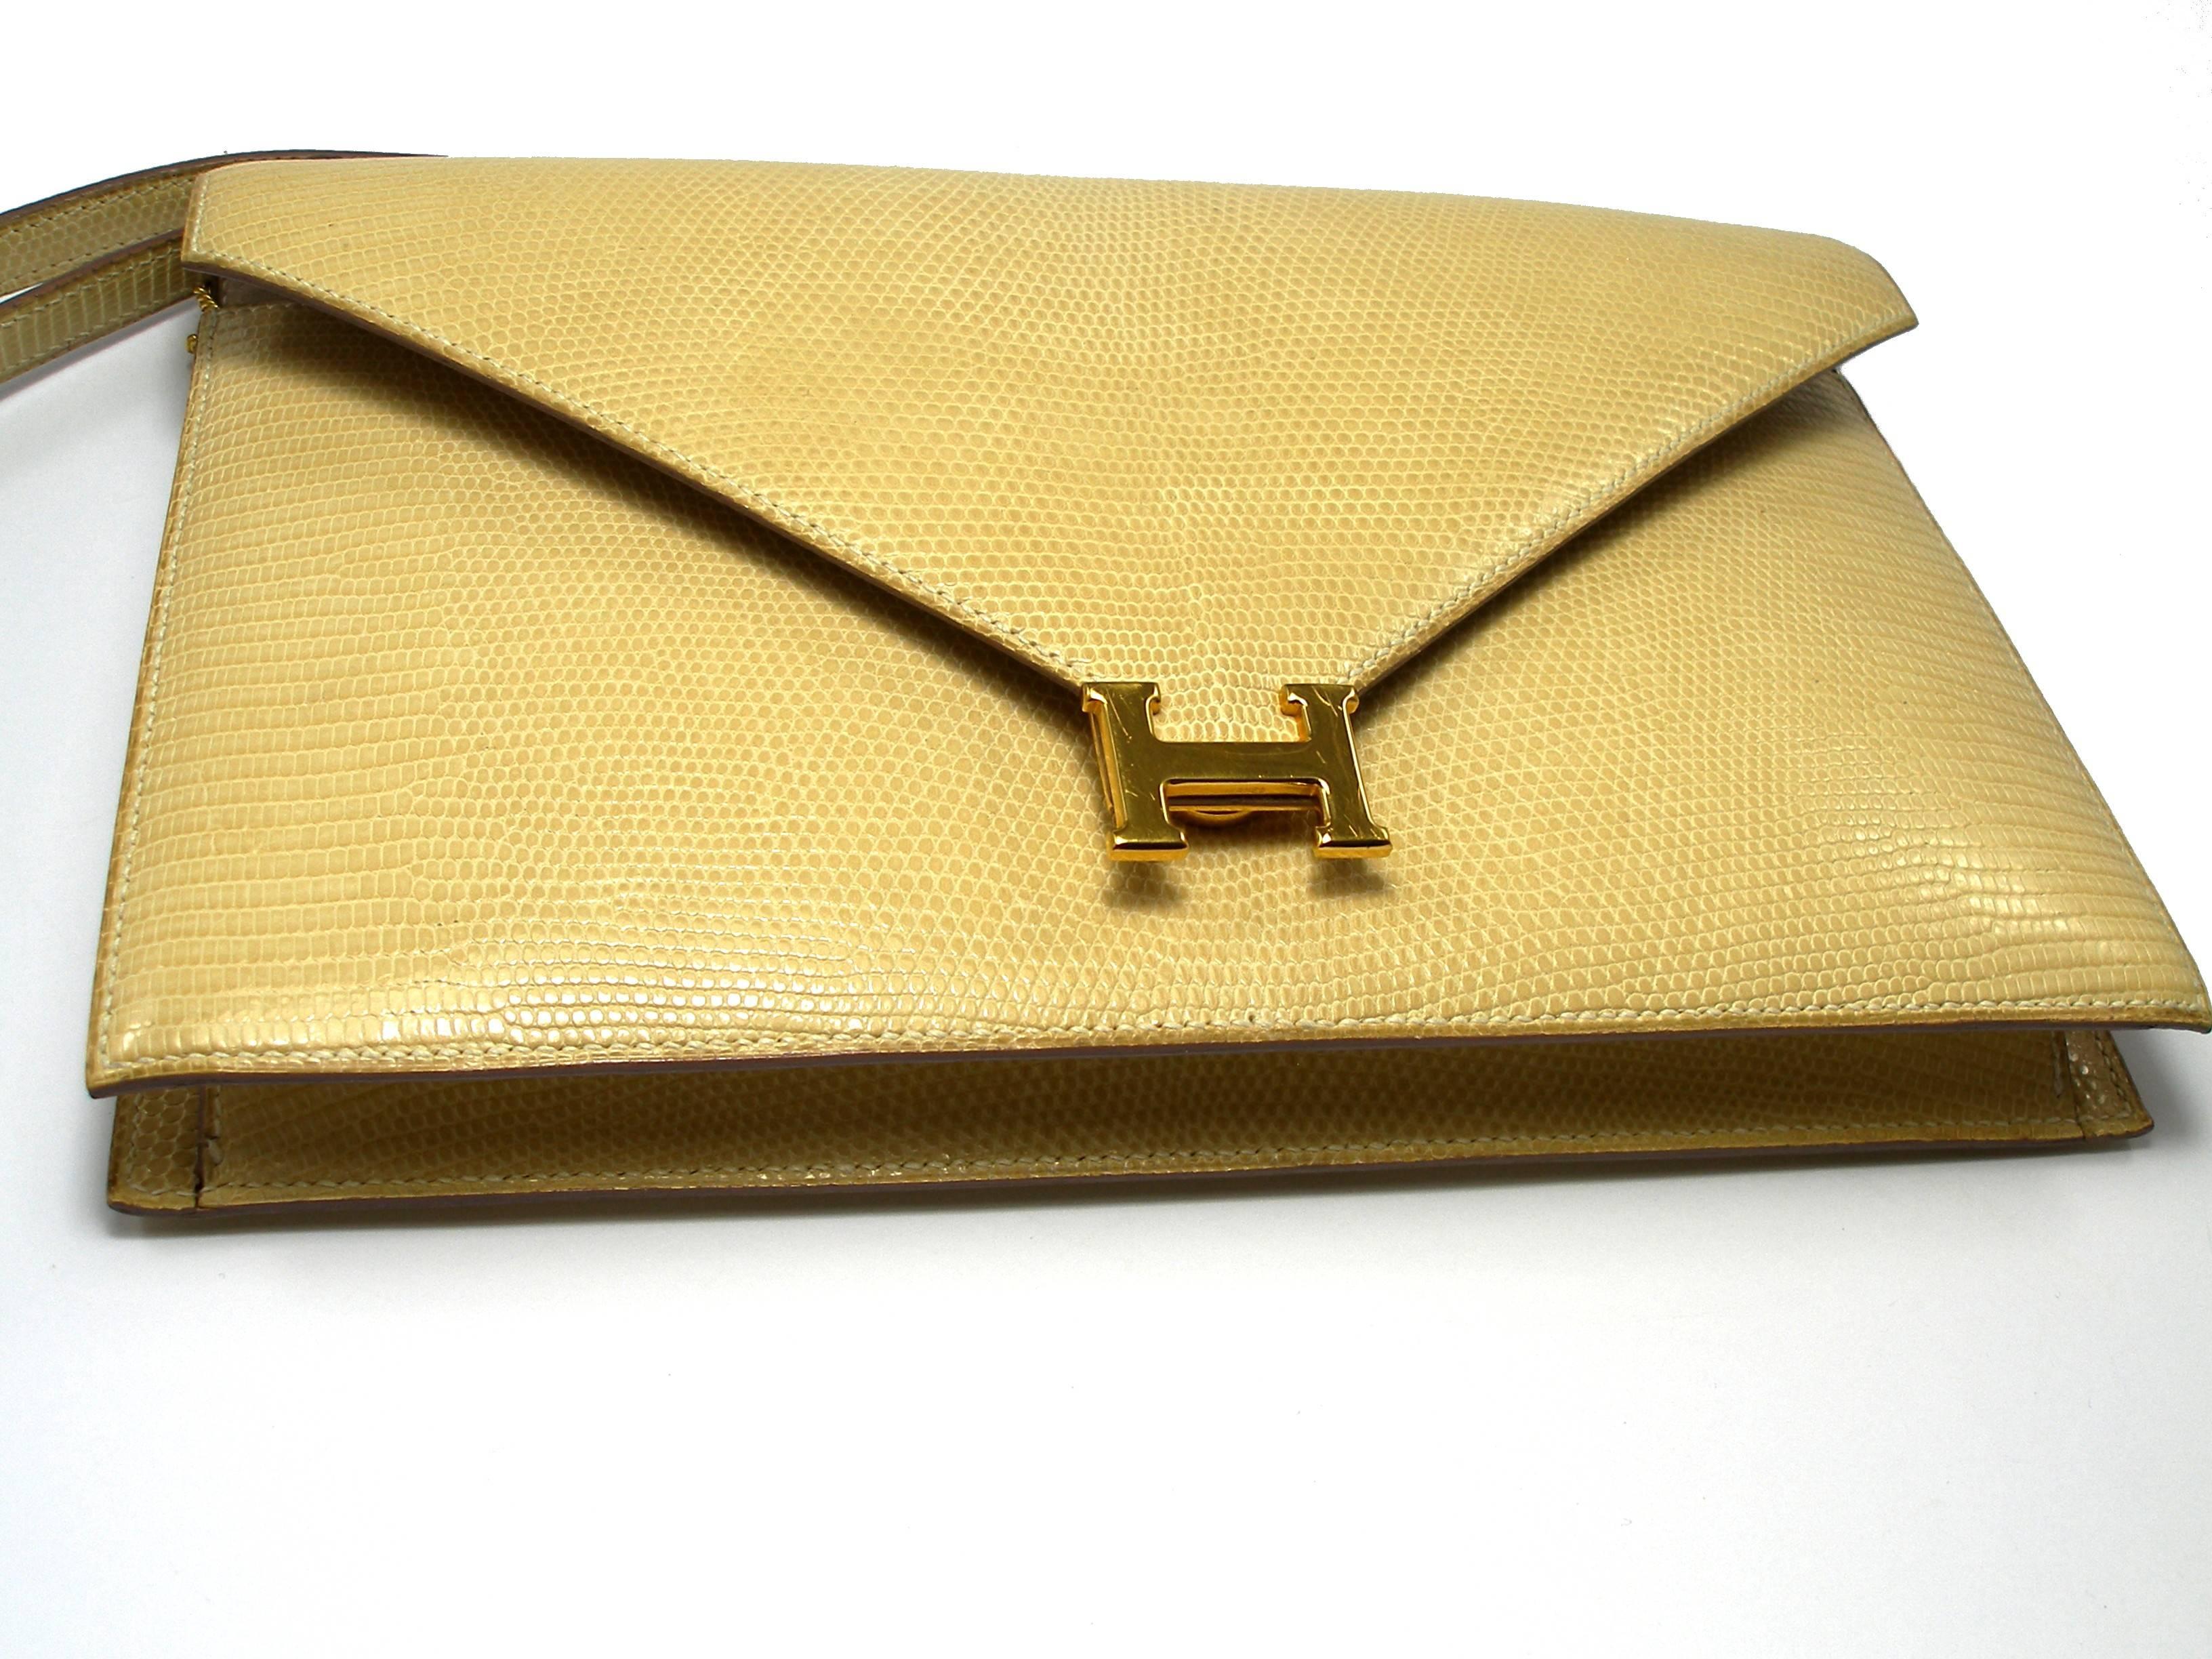 Rare in this color :
CRÈME / COQUILLE D'OEUF
HERMÈS LYDIES VINTAGE CLUTCH
 GOOD CONDITION
Please note : 
-H buckle with micro scratches
-Small marks on the back( please see photos )
-Small discoloration under the flap with the passing time ( barely